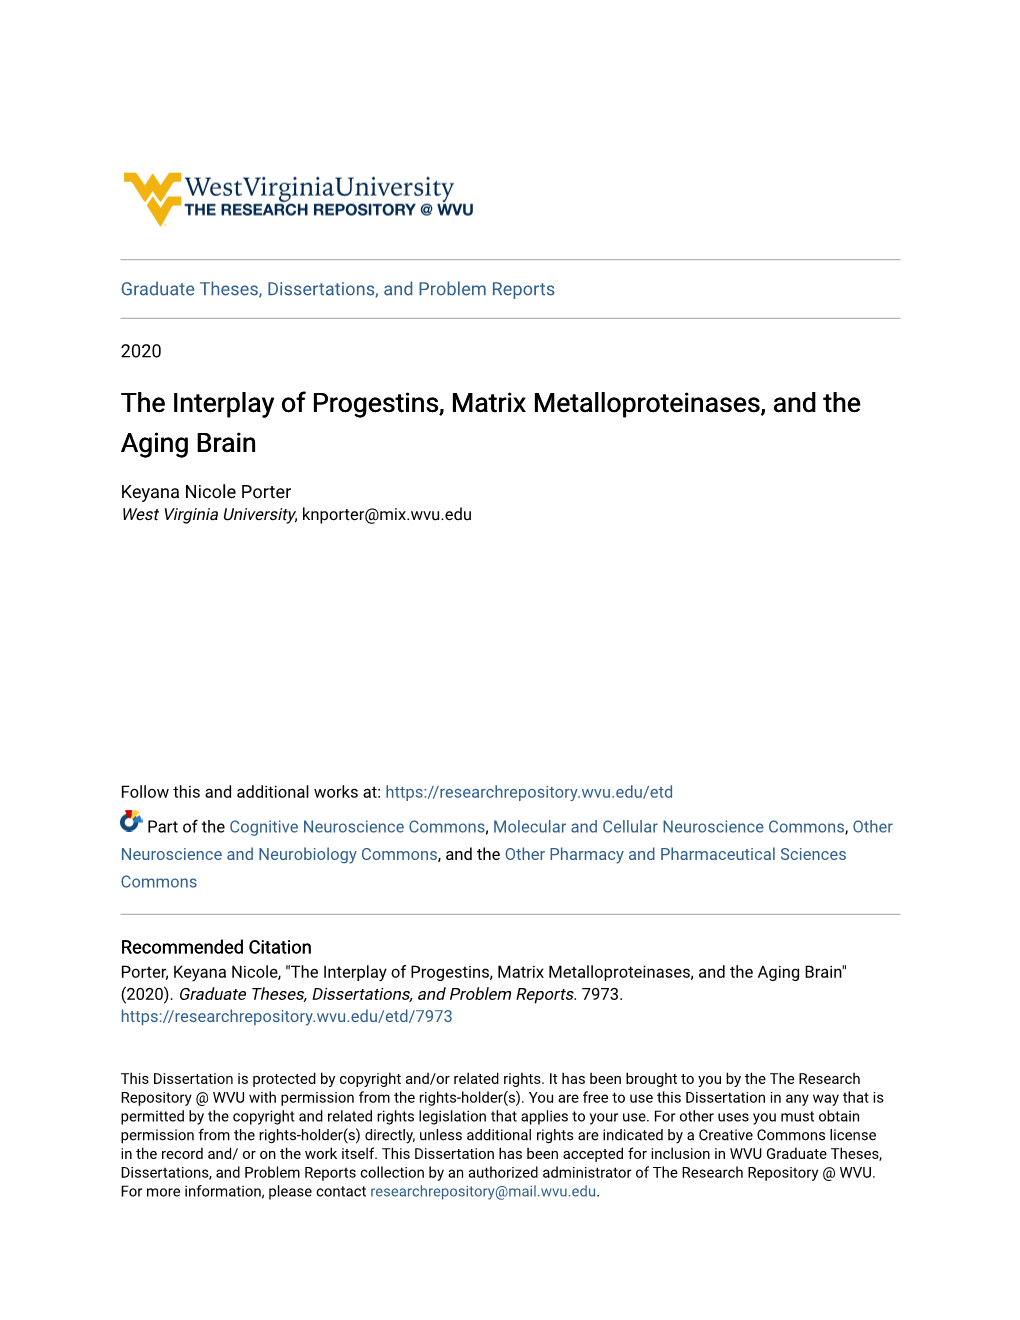 The Interplay of Progestins, Matrix Metalloproteinases, and the Aging Brain